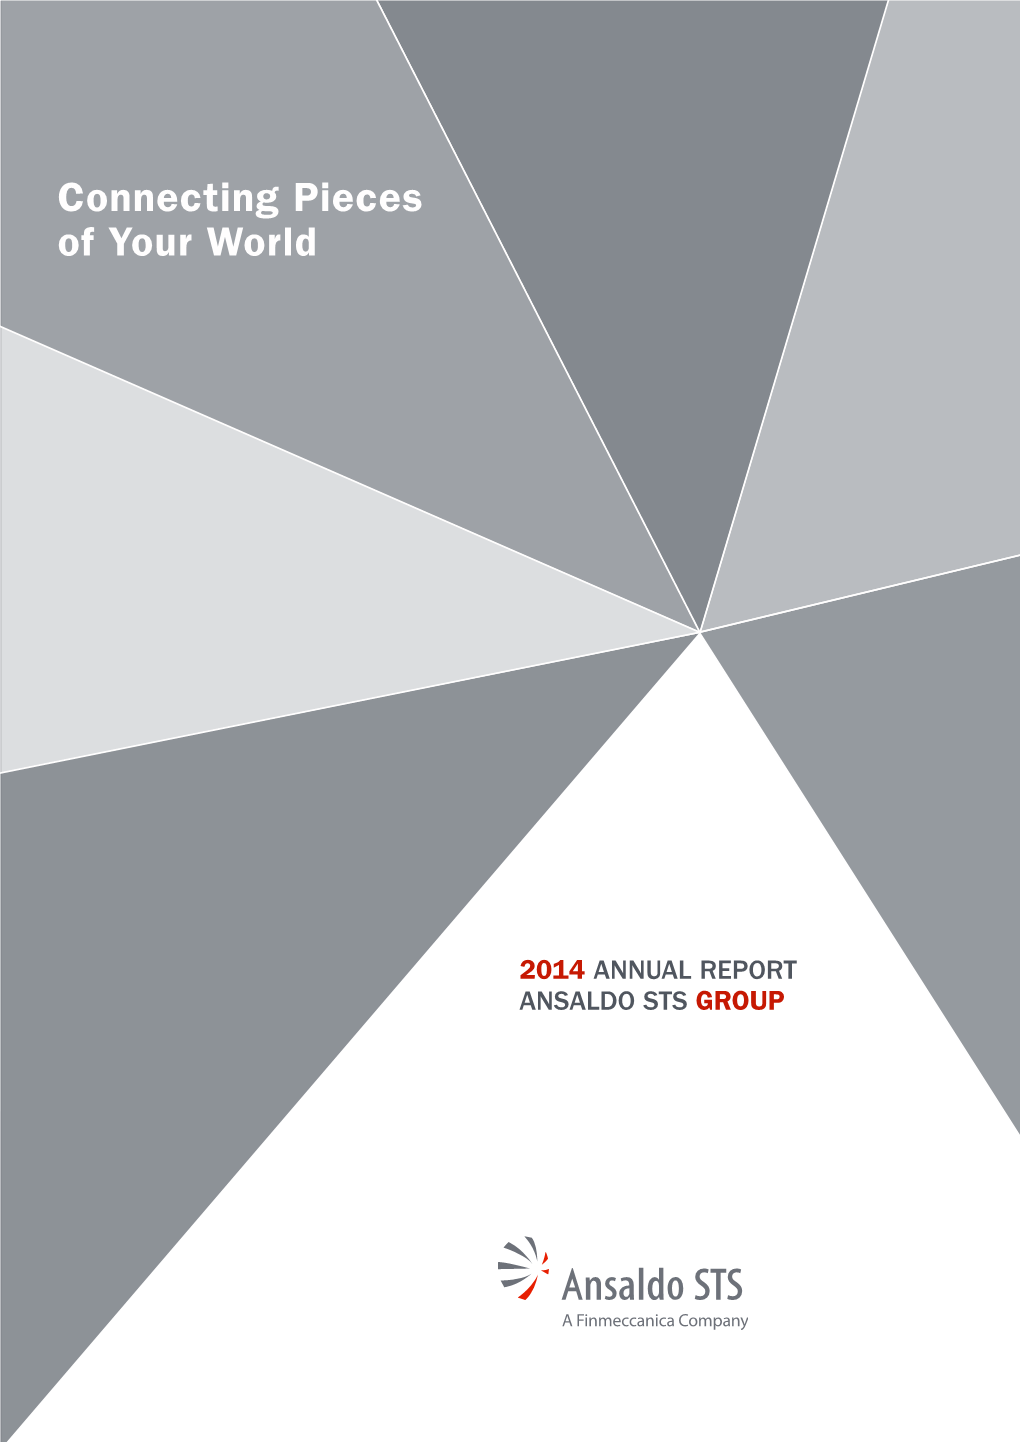 2014 Annual Report Asts Group